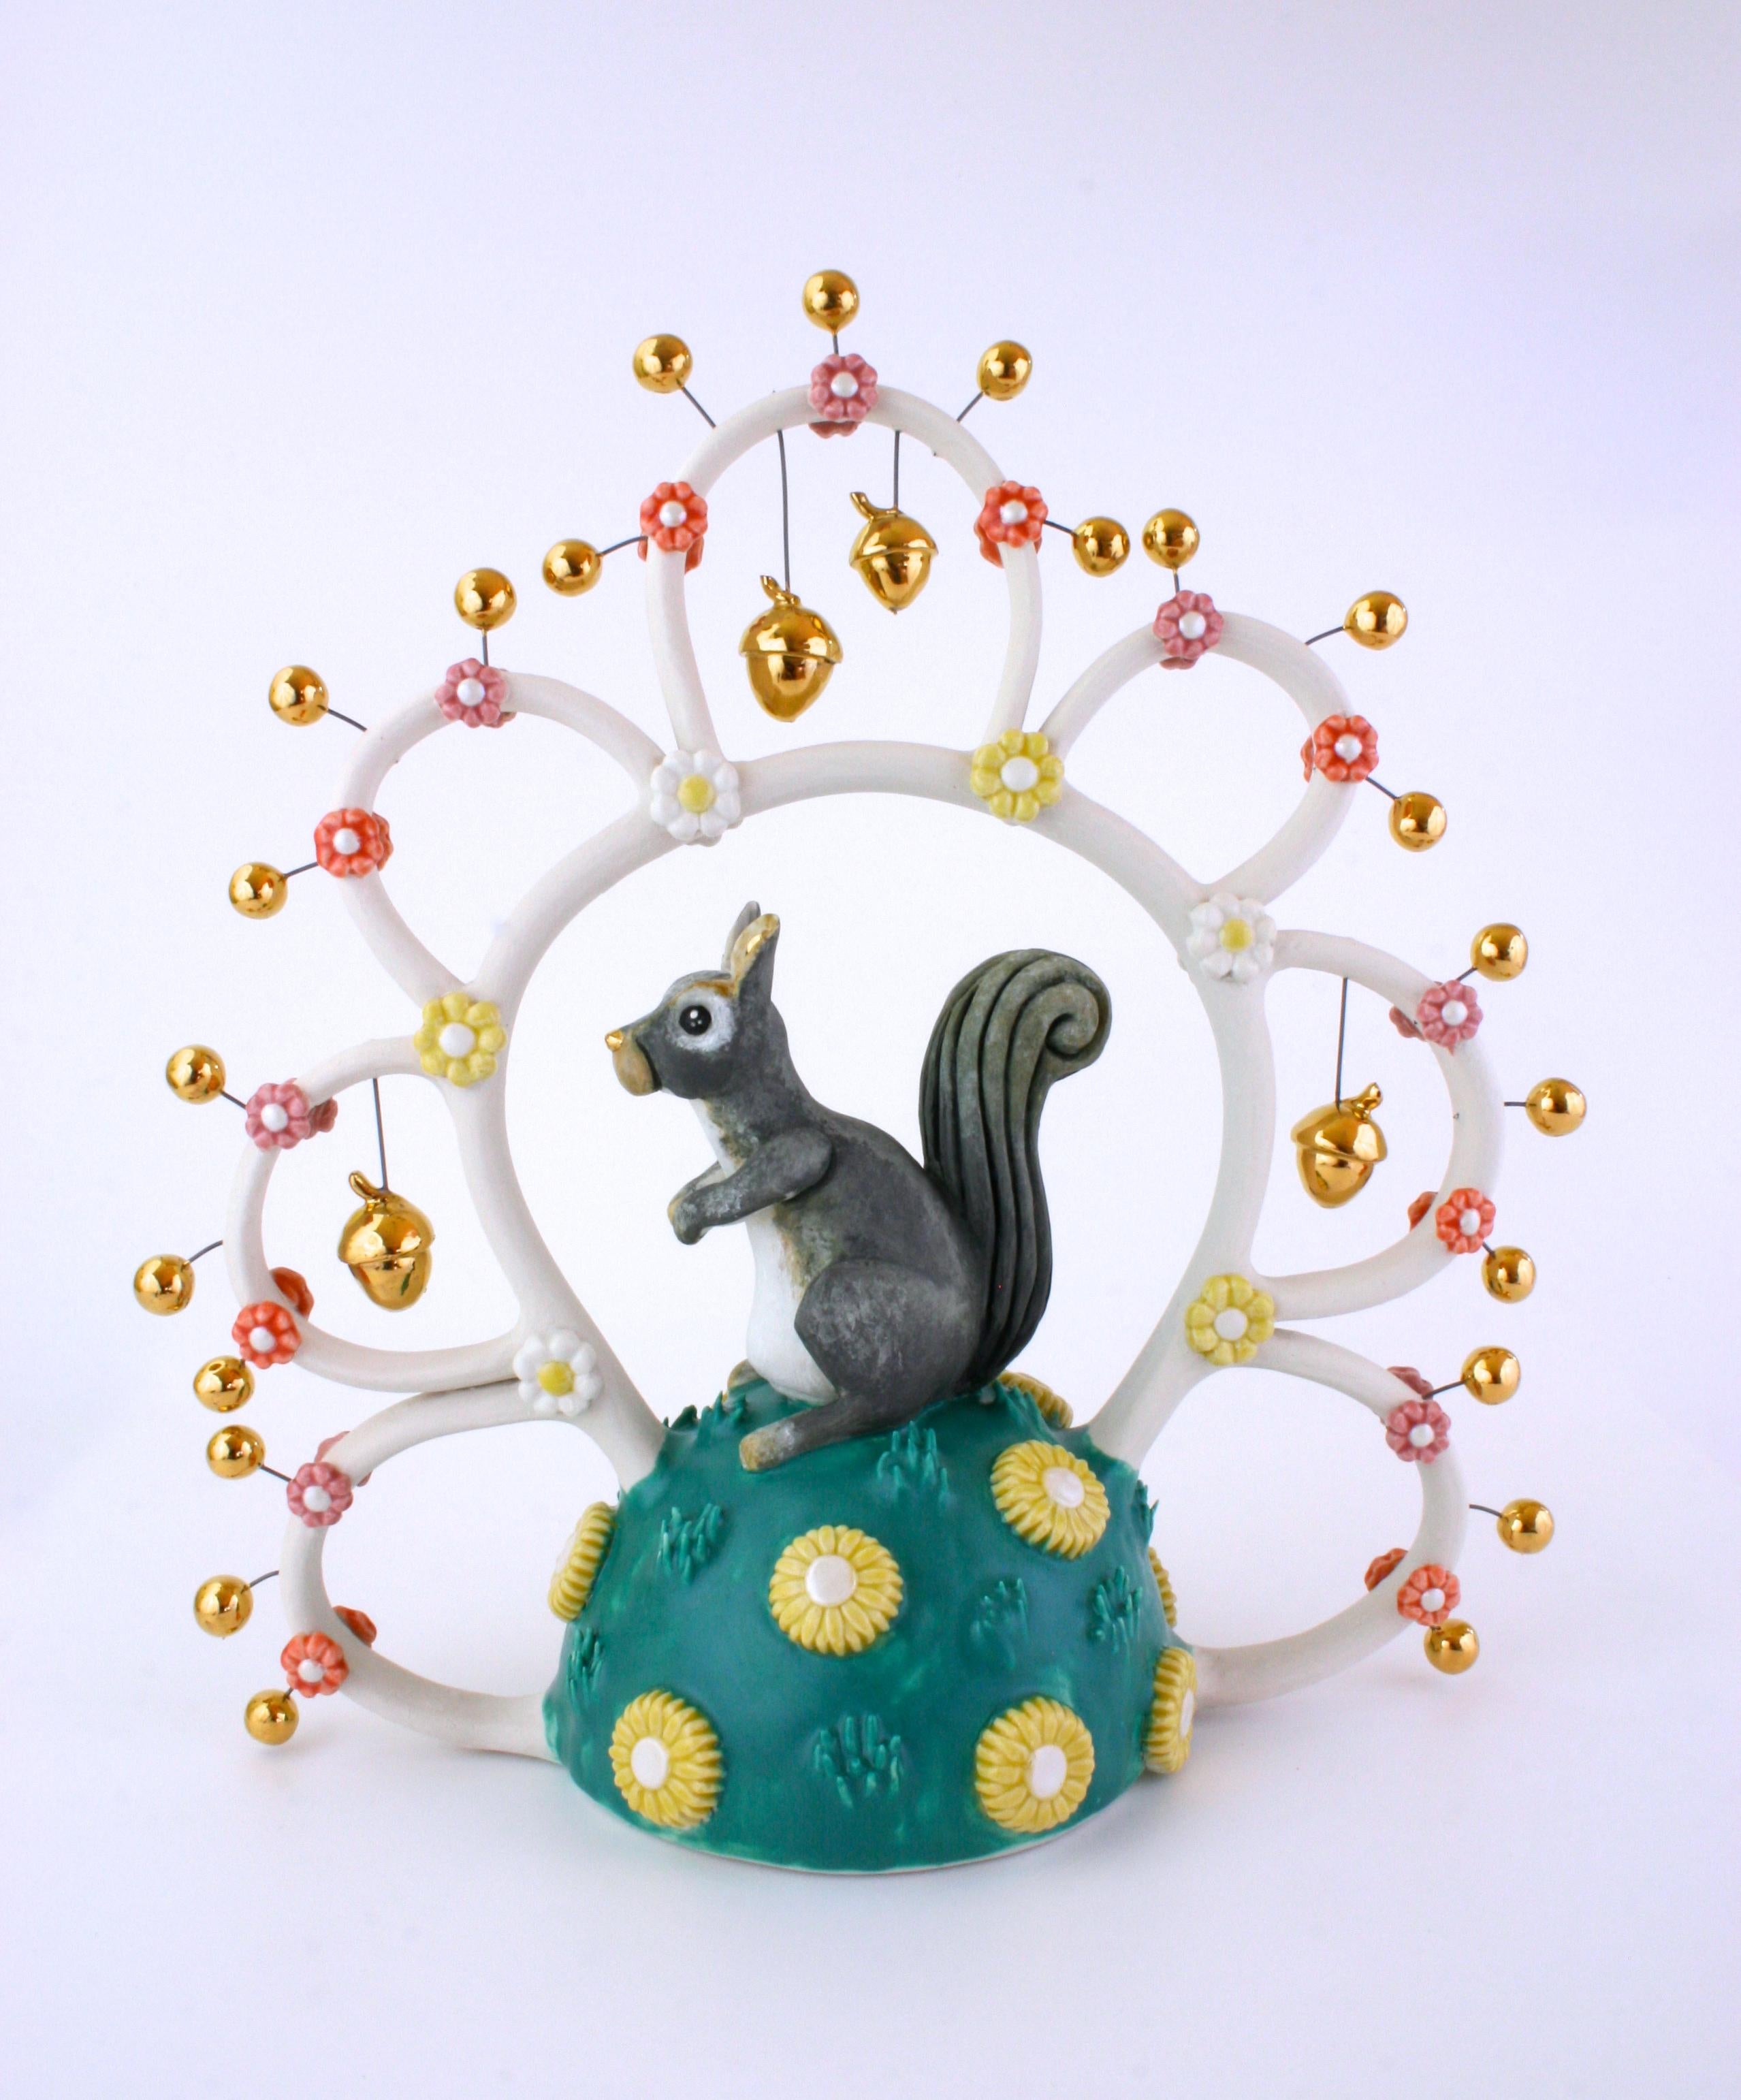 Taylor Robenalt Figurative Sculpture - NUTTY SQUIRREL - porcelain ceramic sculpture of squirrel with acorns and flowers